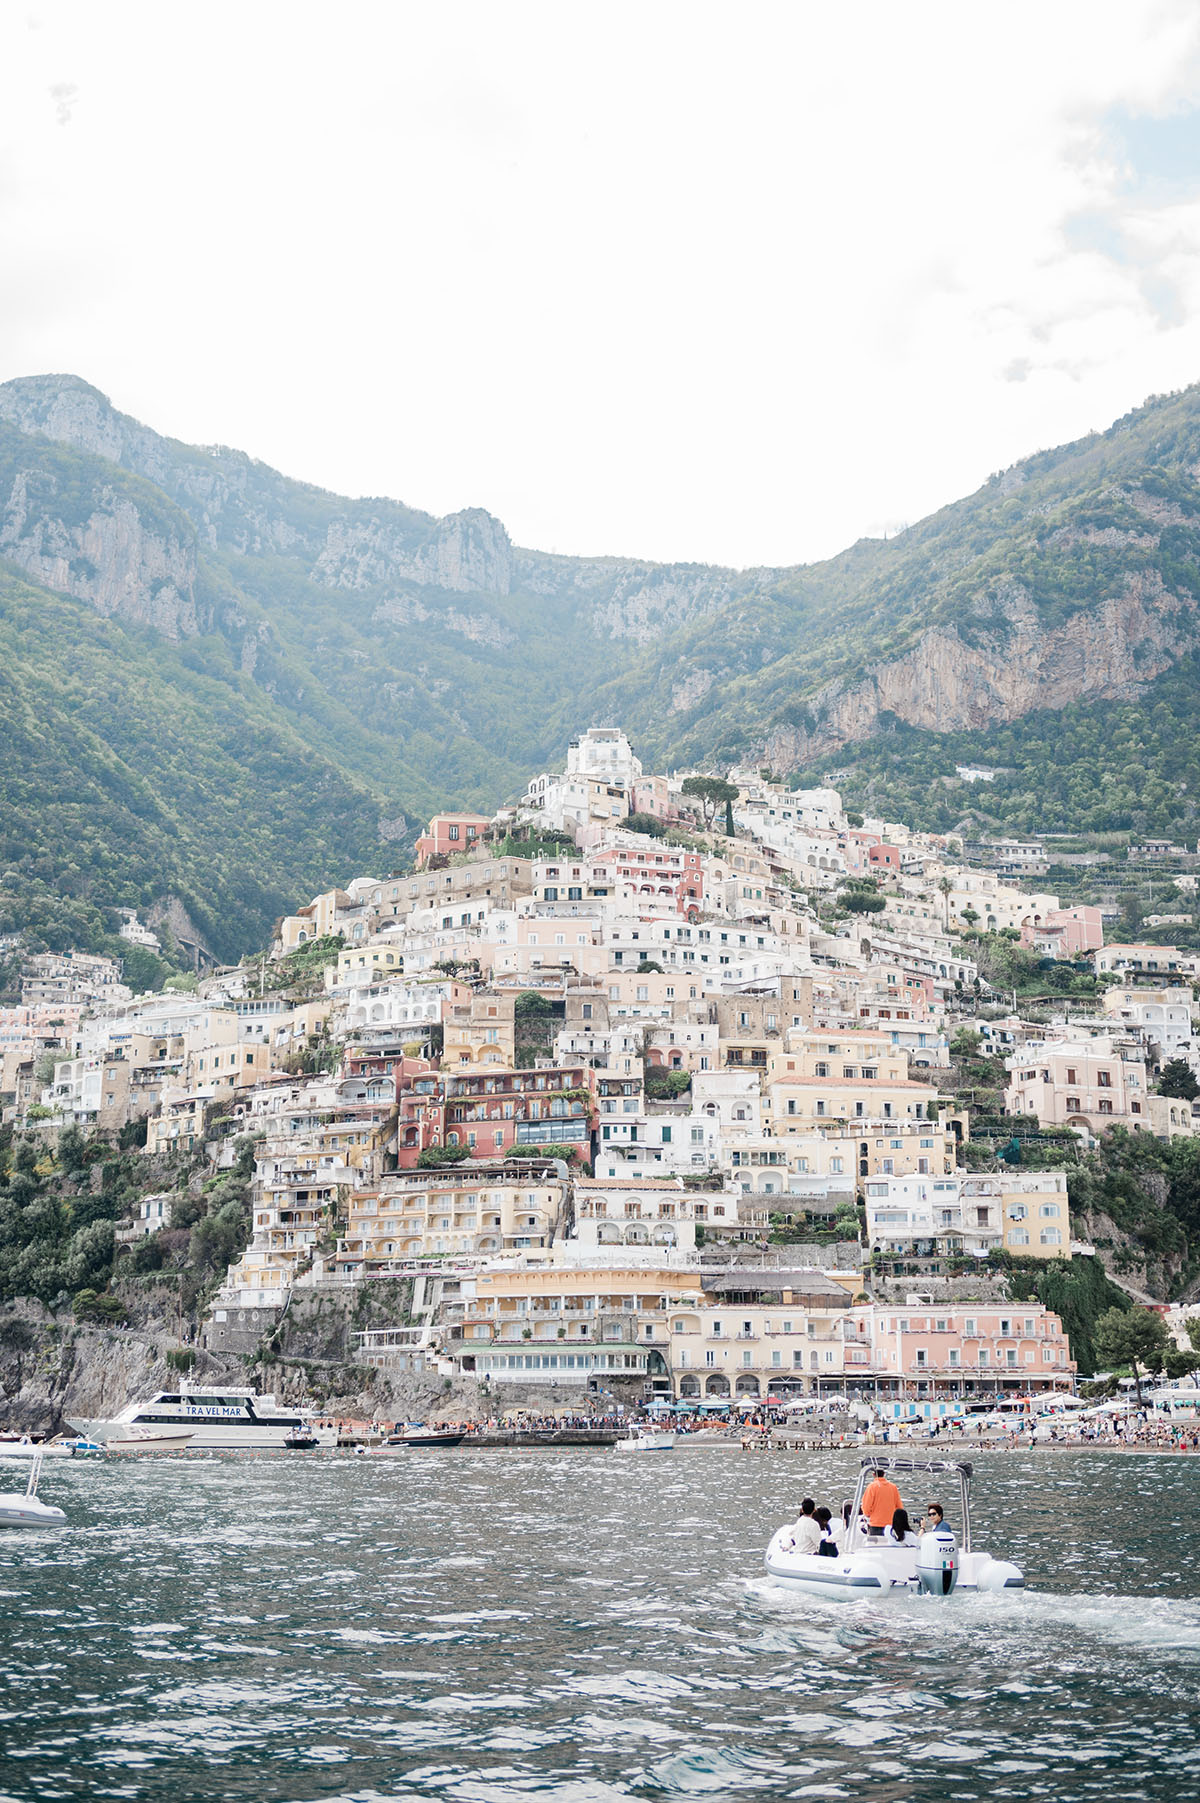 City of Positano, Italy from boat in the sea